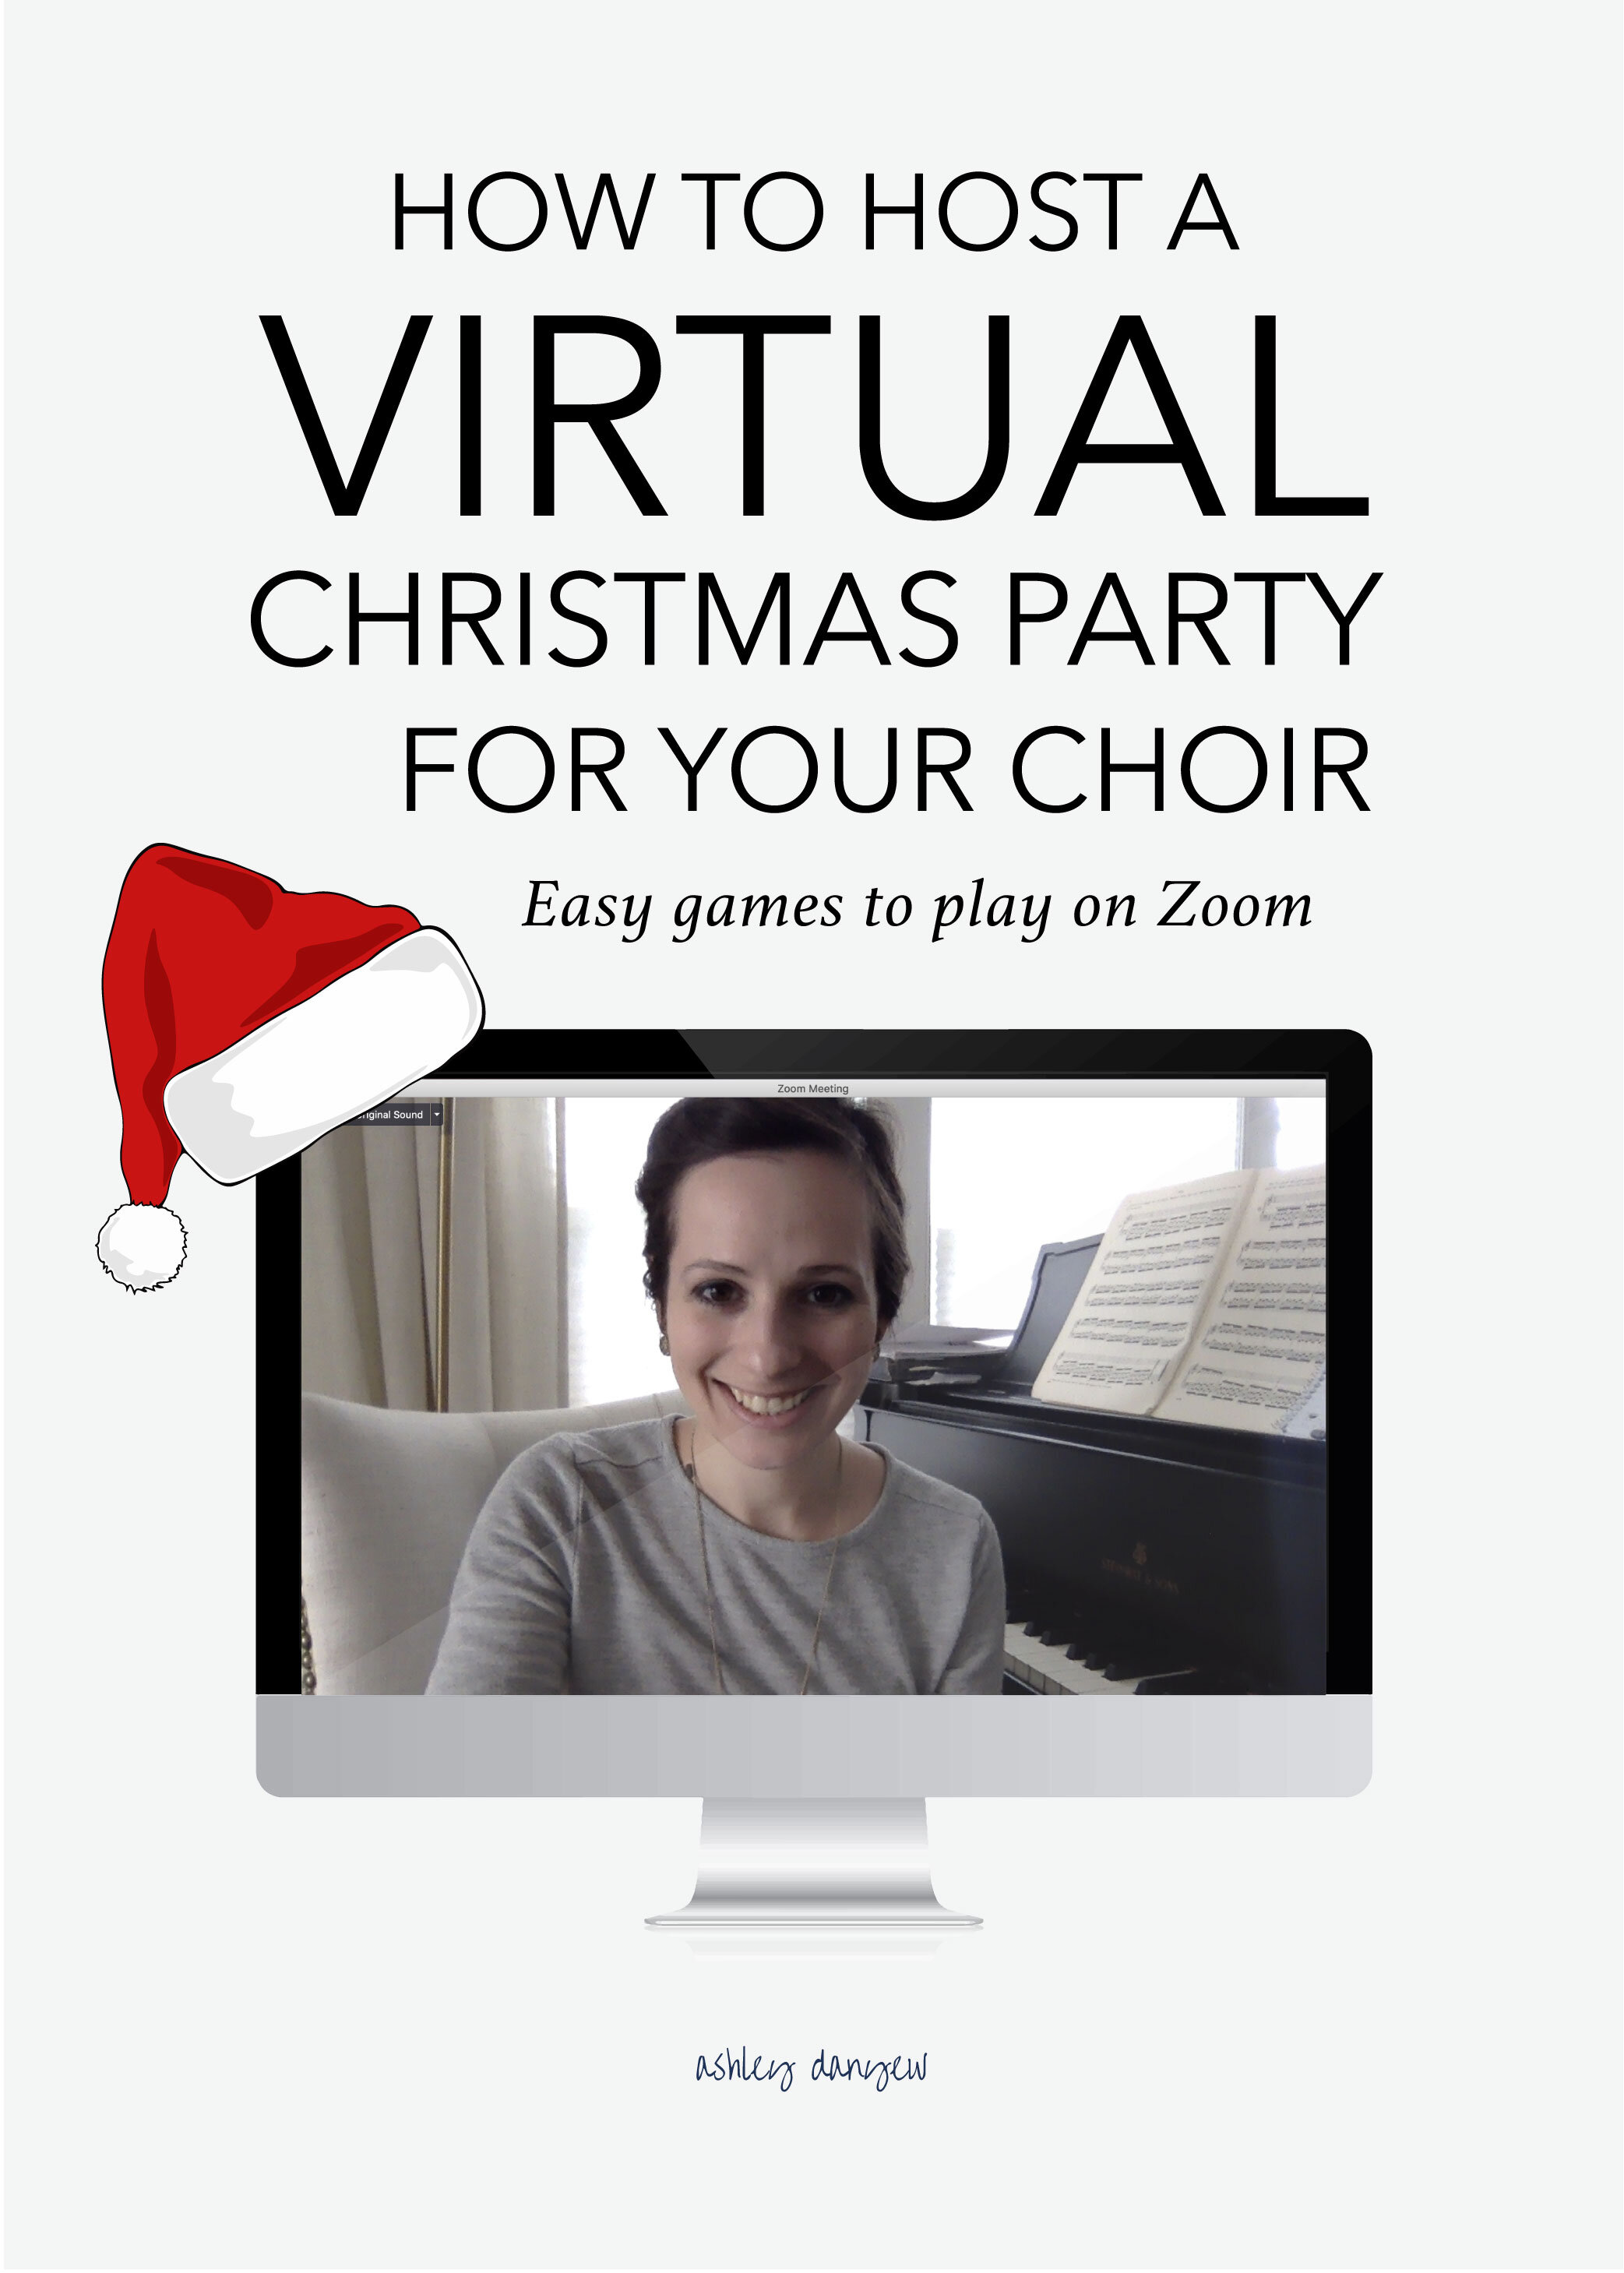 How to Host a Virtual Christmas Party for Your Choir